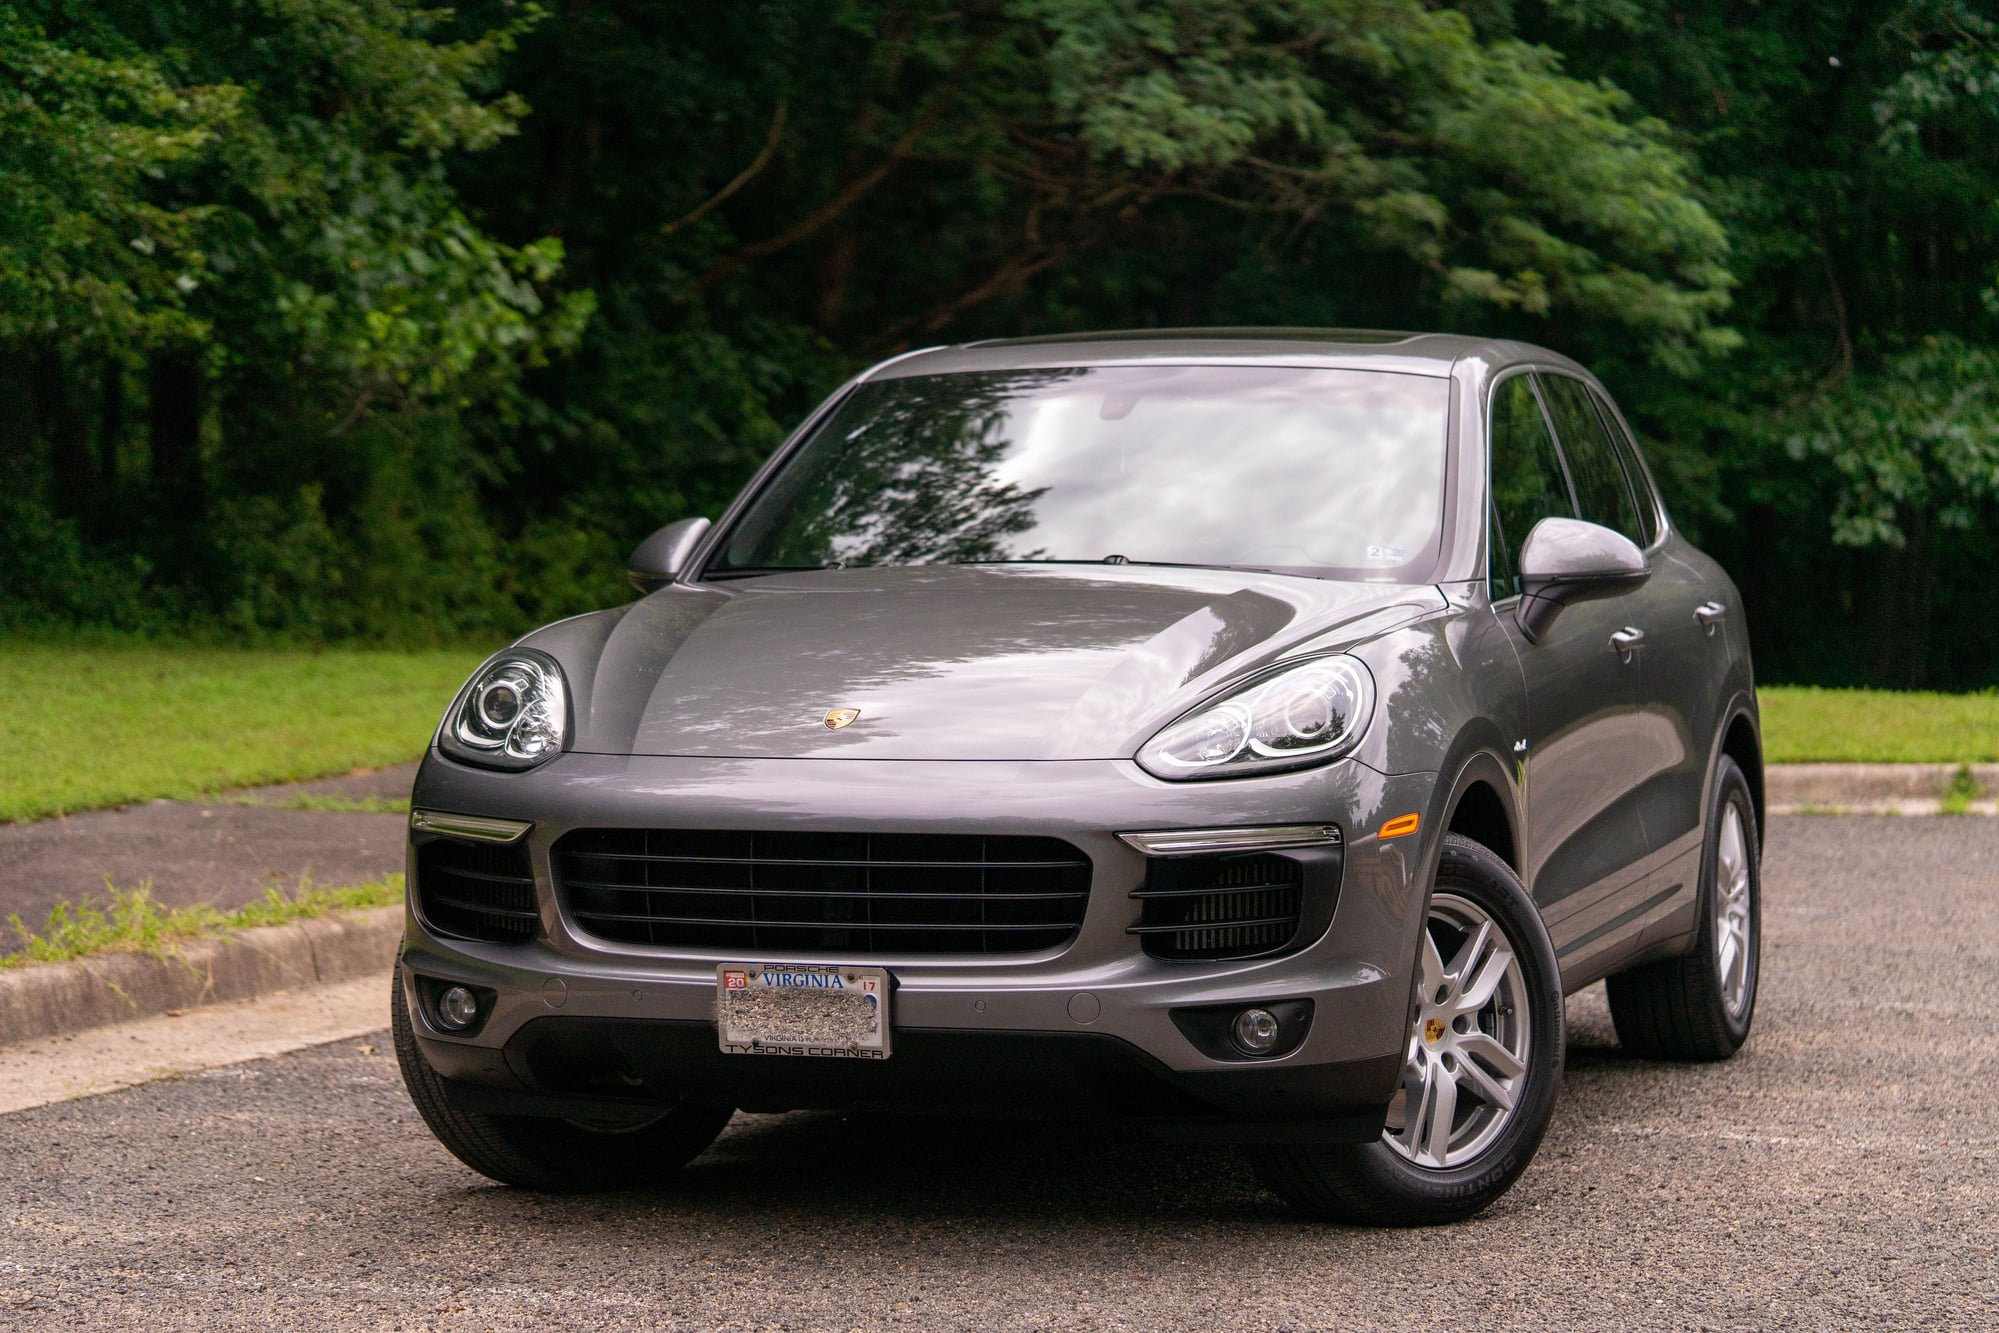 2015 Porsche Cayenne - 2015 Cayenne Diesel, Premium, Panoramic, Tow, LCA, 14-way Vented Seats, Full Warranty - Used - VIN WP1AF2A23FLA43381 - 52,250 Miles - 6 cyl - AWD - Automatic - SUV - Gray - Oakton, VA 22124, United States